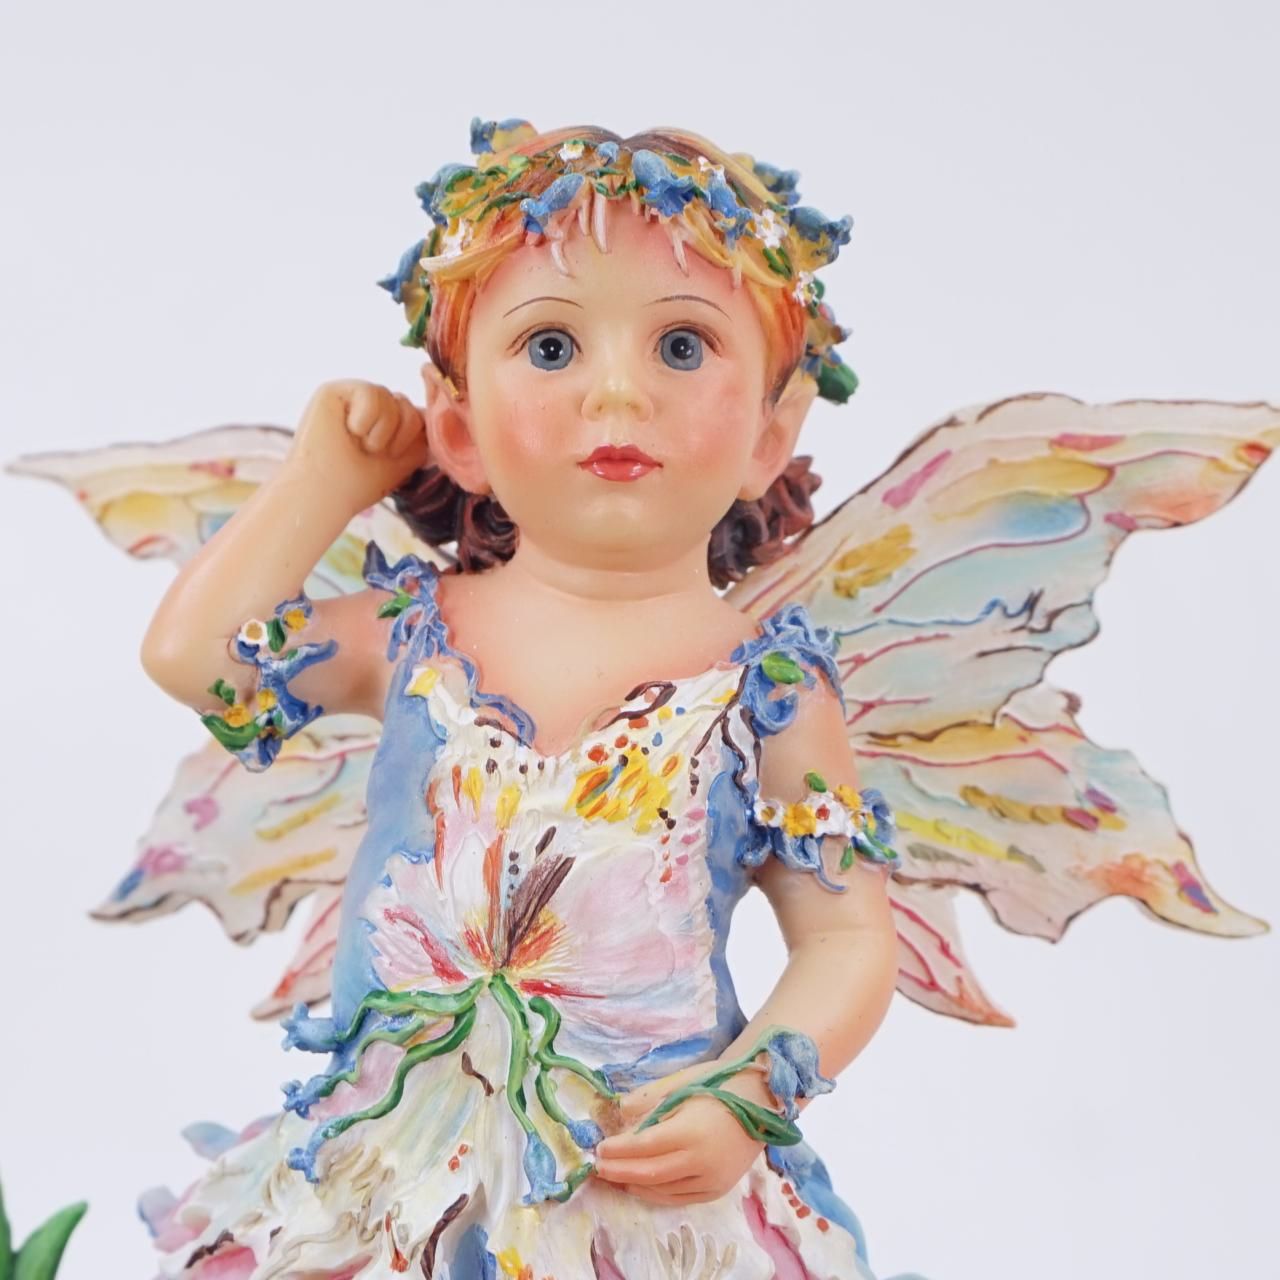 Crisalis Collection★ Wooded Bluebell Faerie (1-3286) 20% OFF